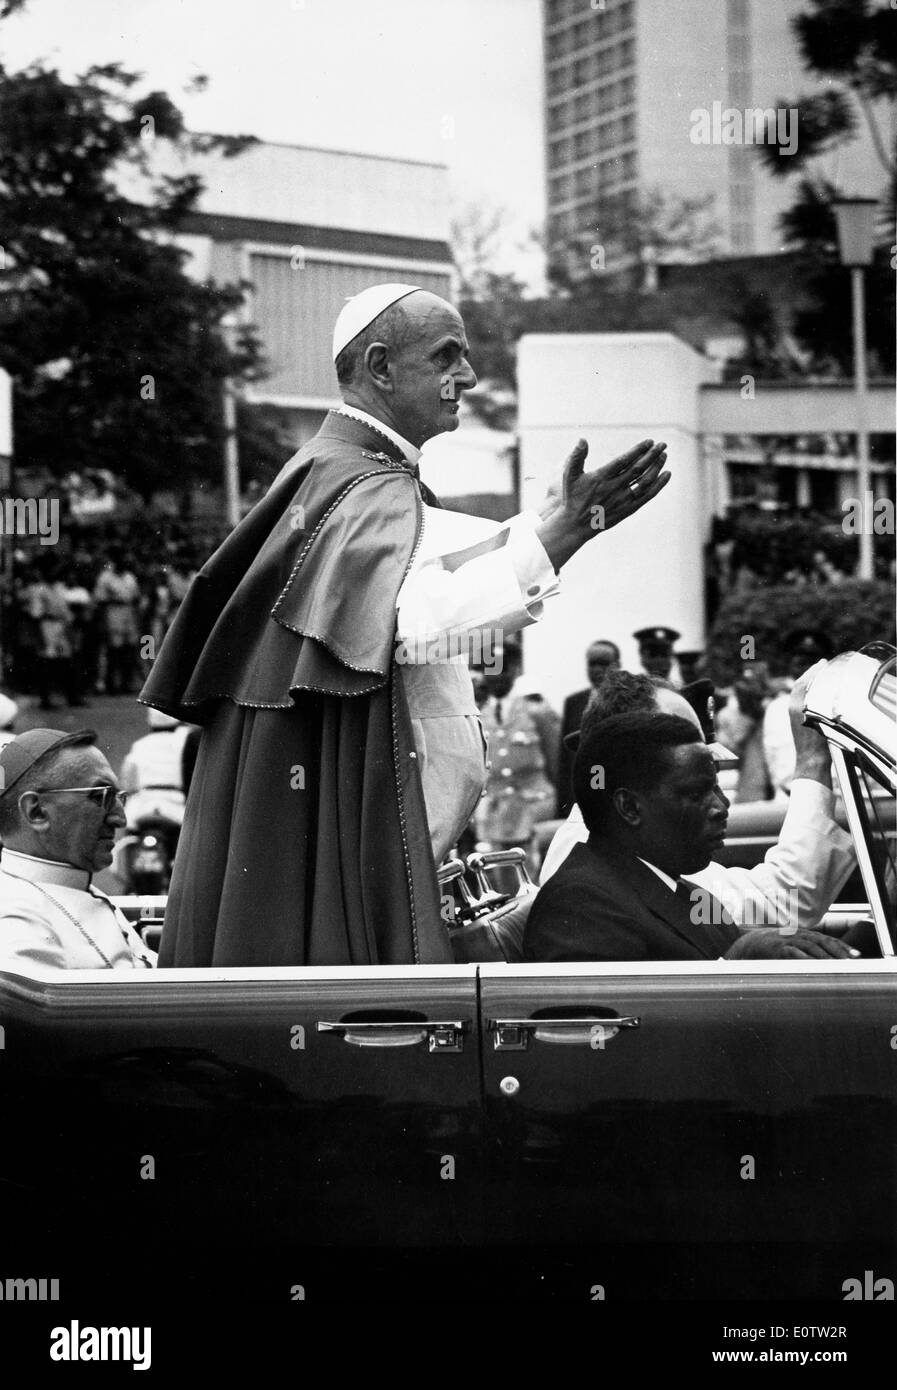 Pope Paul Vl in a parade Stock Photo